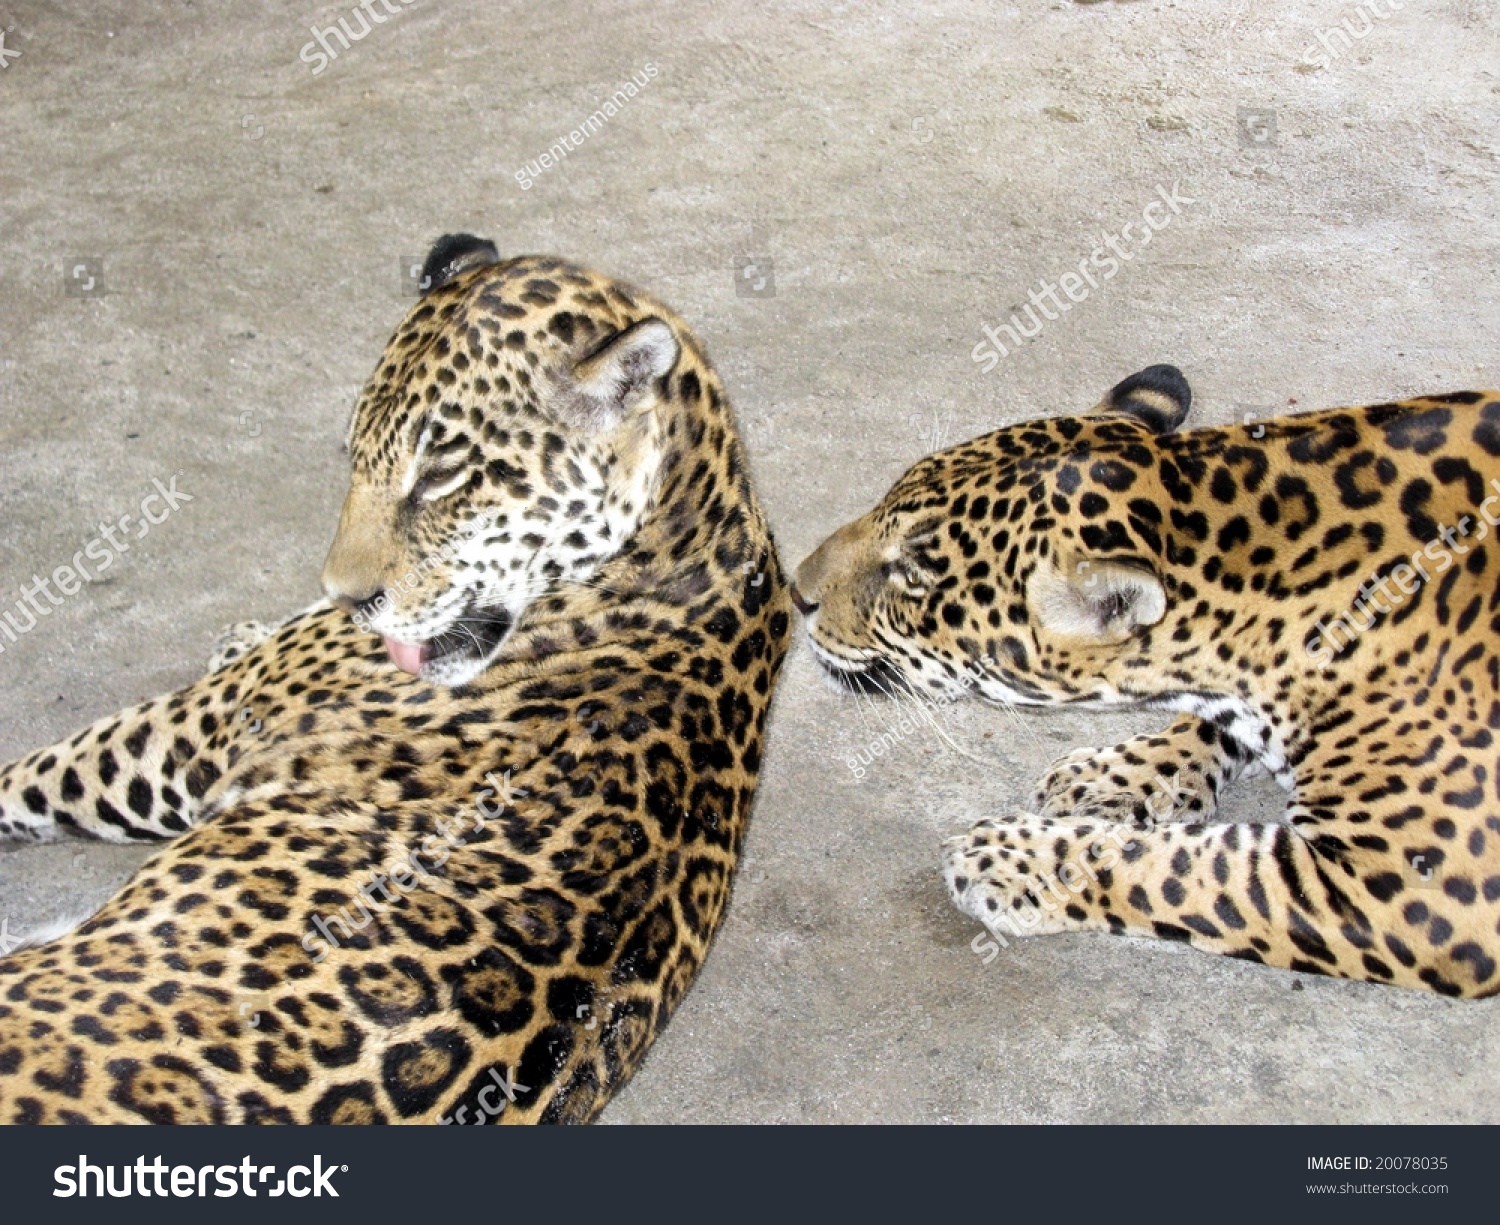 The Jaguar Or (Panthera Onca) Is A Big Cat, A Feline In The Panthera